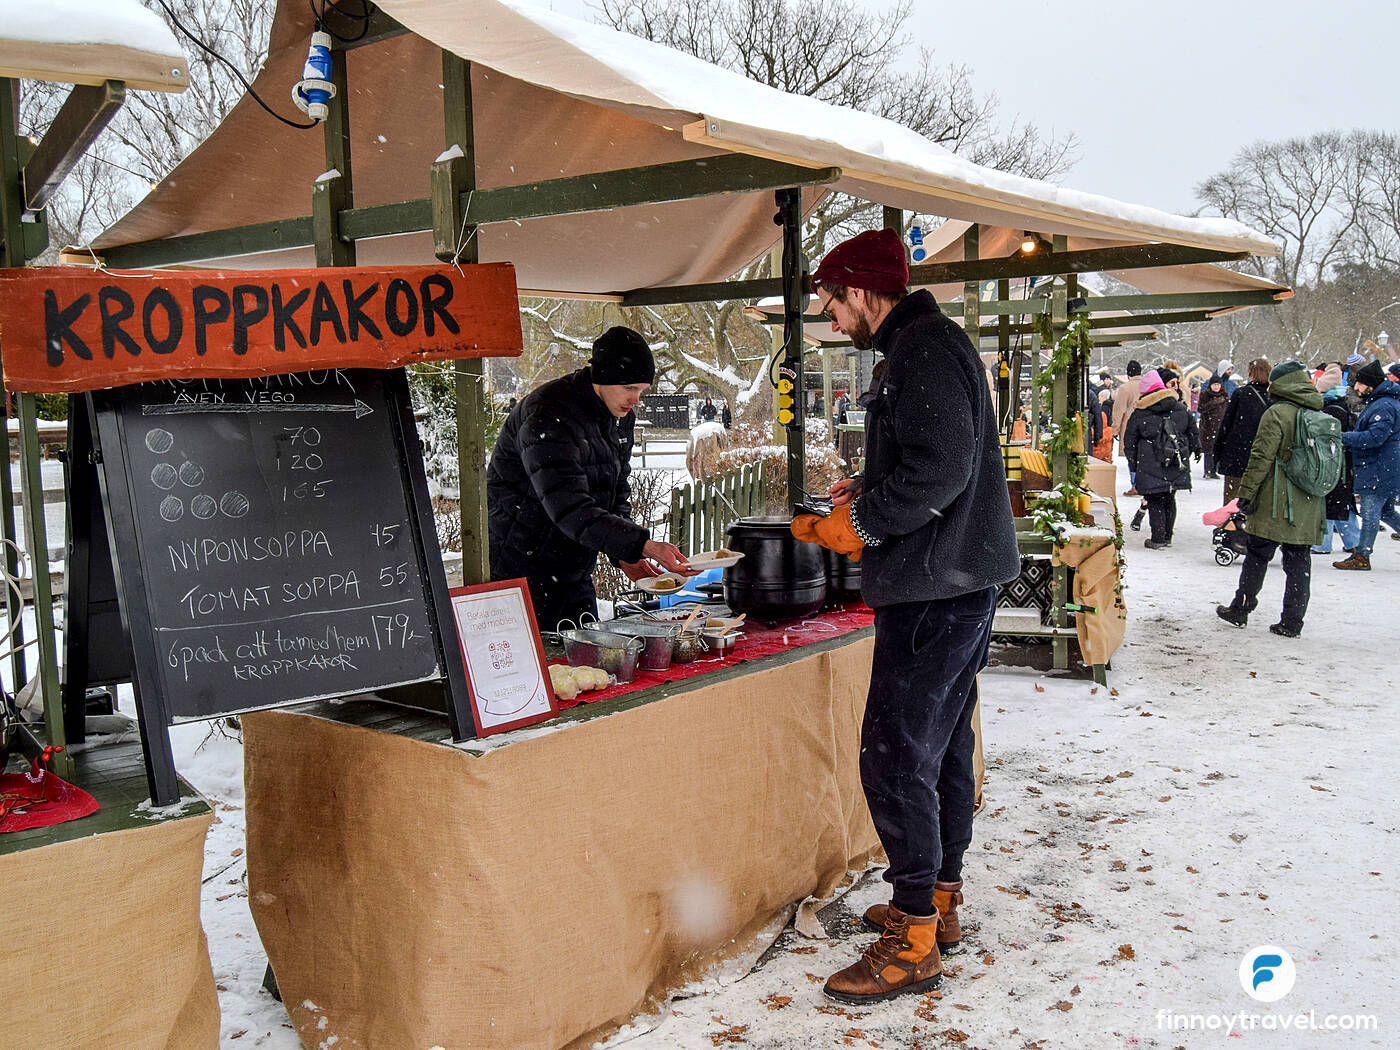 A visitor is buying soup from a market stall at the Skansen